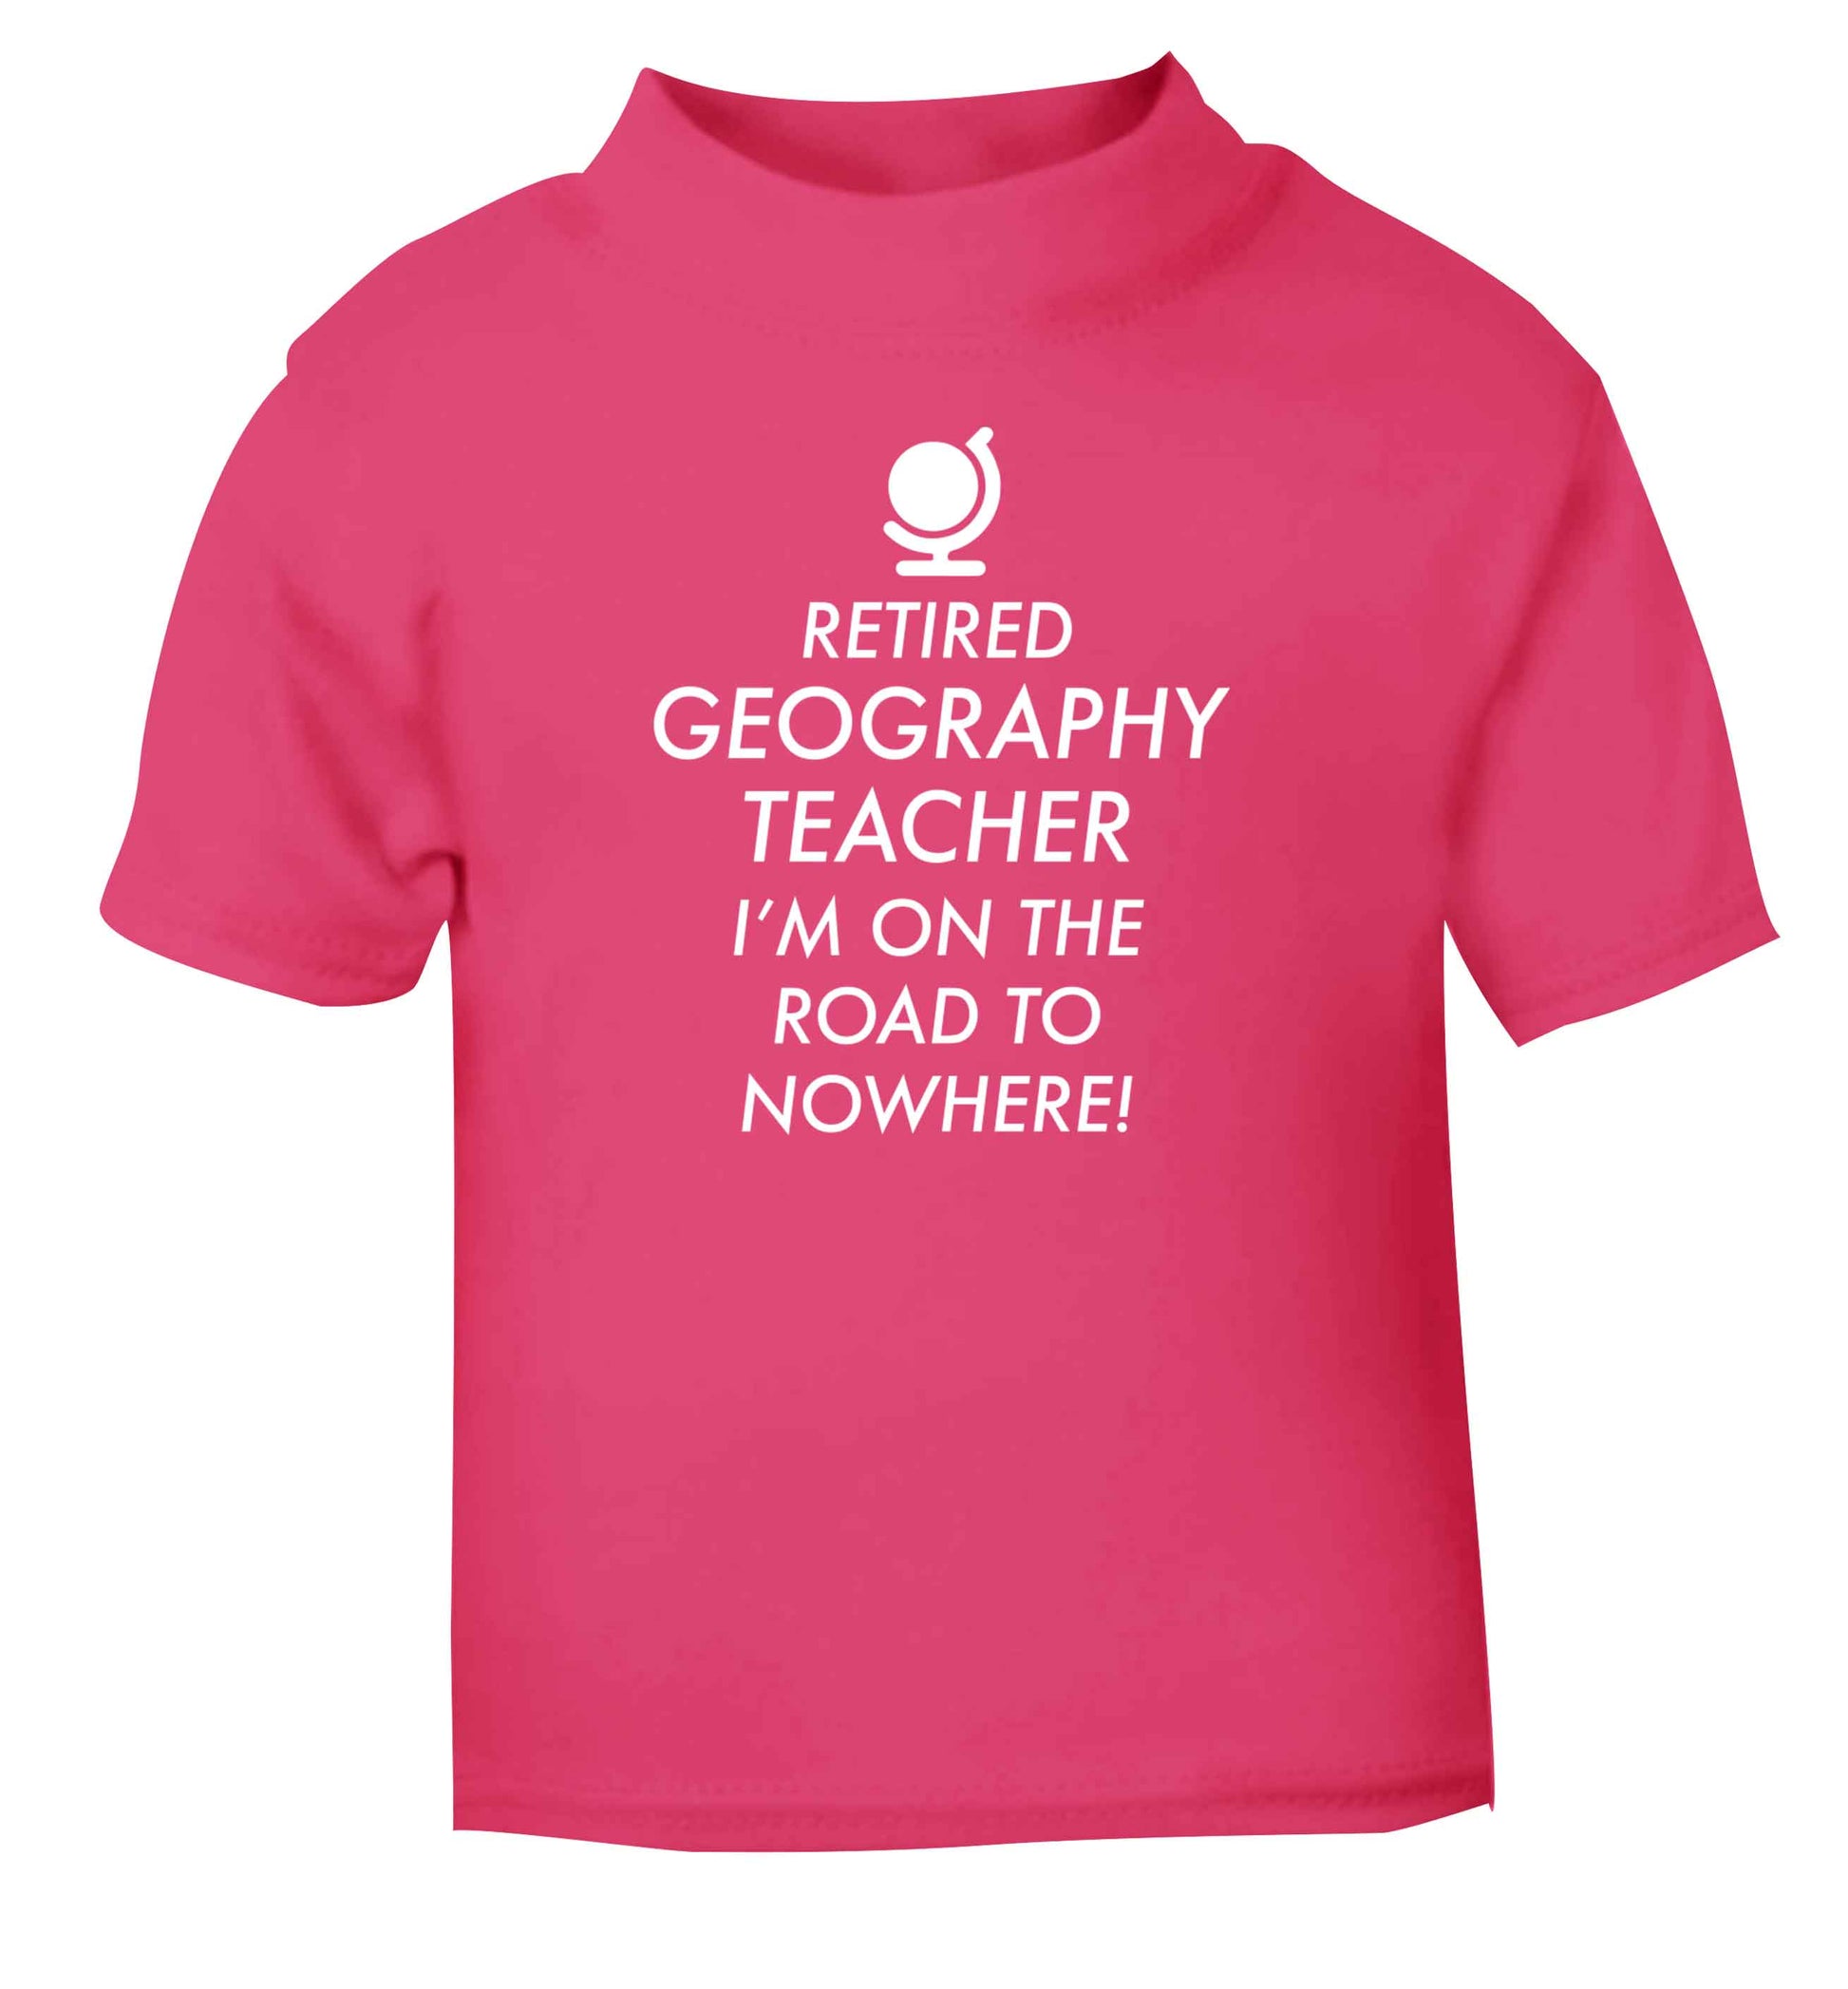 Retired geography teacher I'm on the road to nowhere pink Baby Toddler Tshirt 2 Years